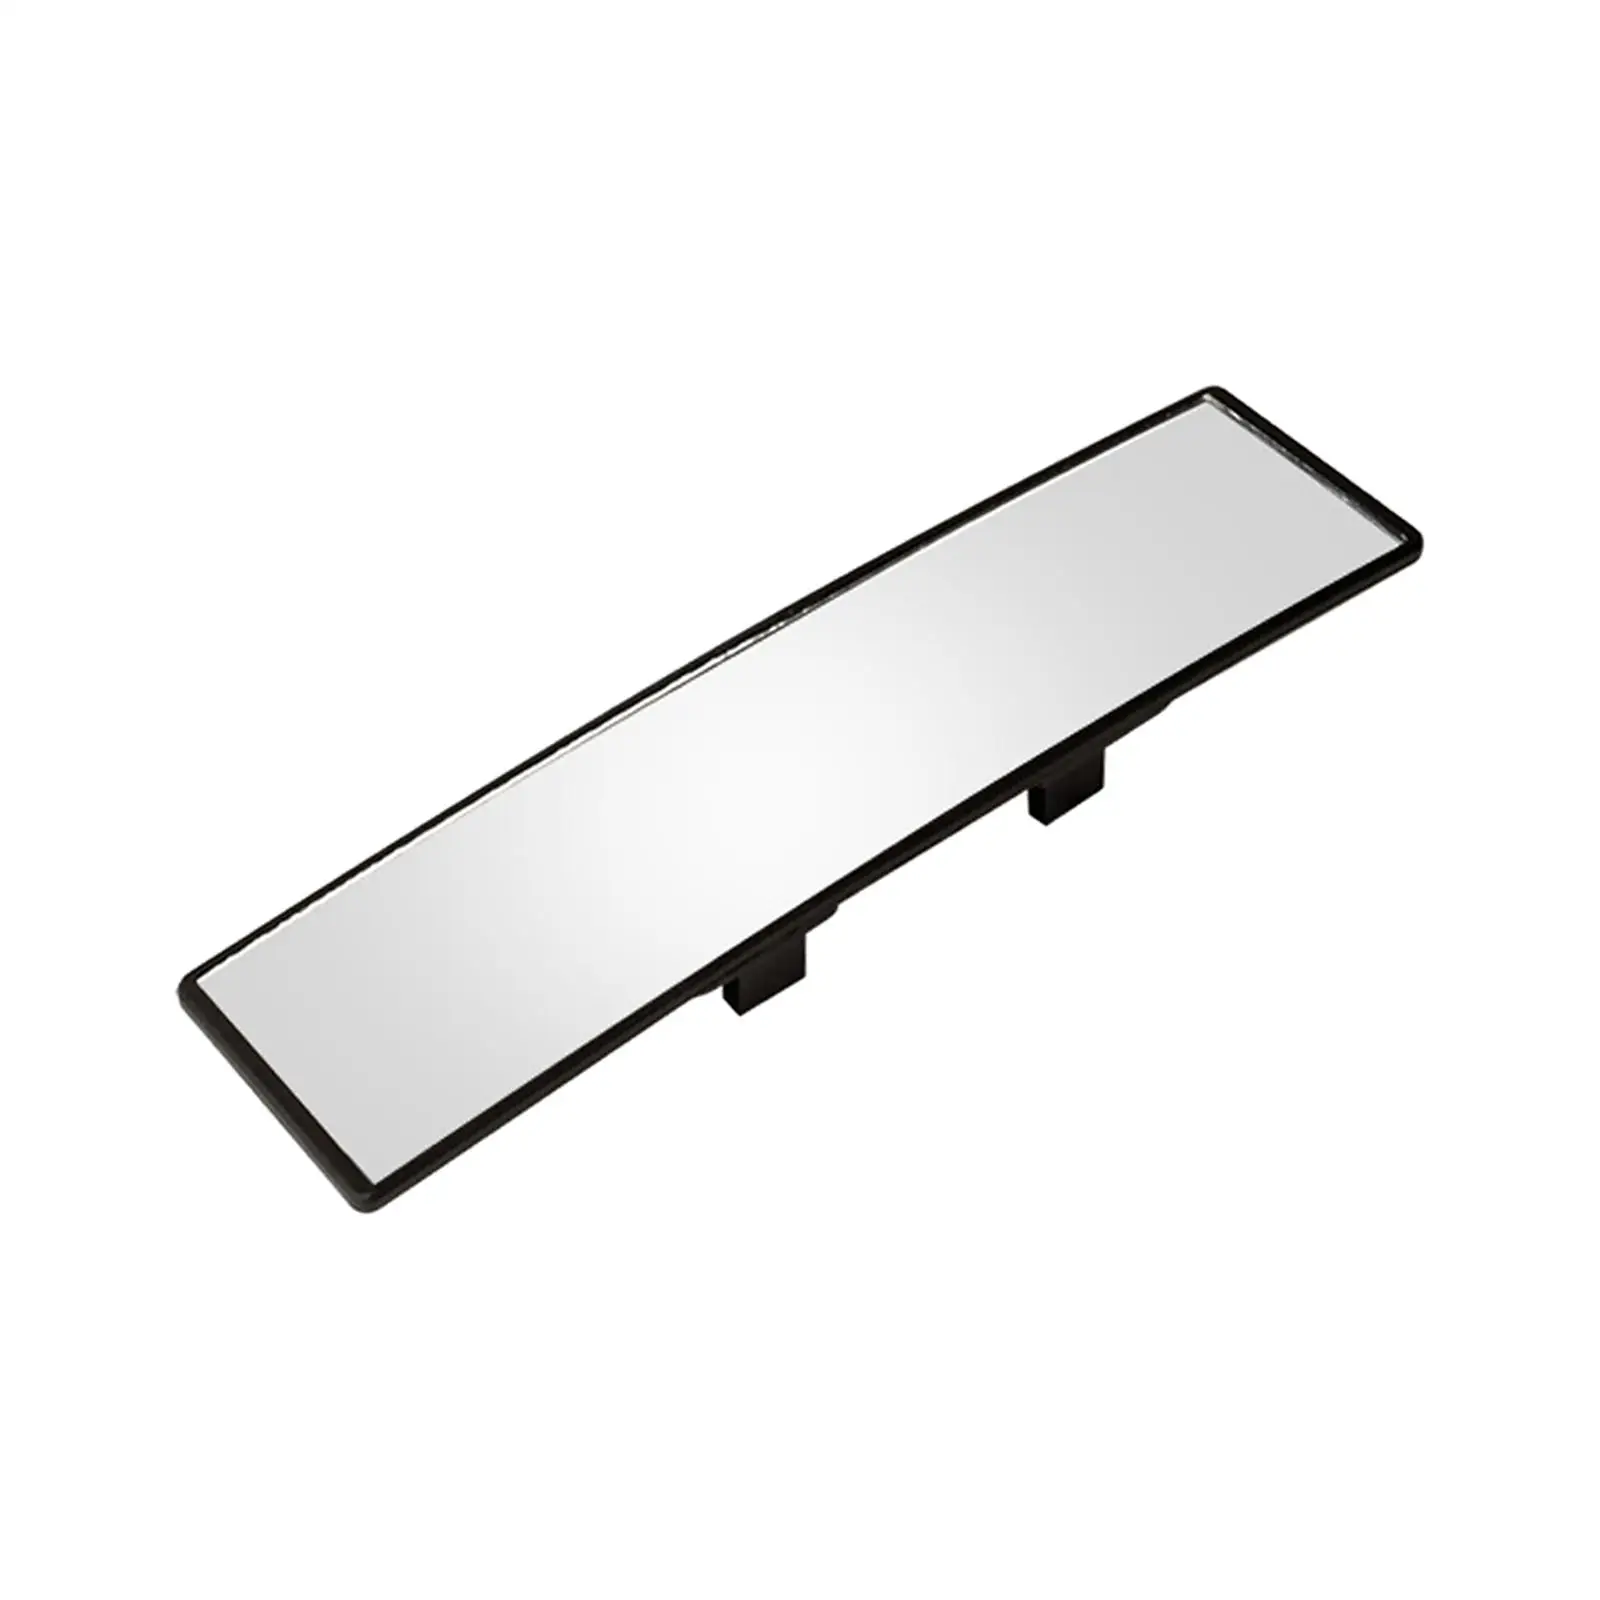 Rear View Mirror 11.2 inch Interior Accessories Panoramic Rearview Mirror Clear View for Automobile Vehicles Trucks Van Car